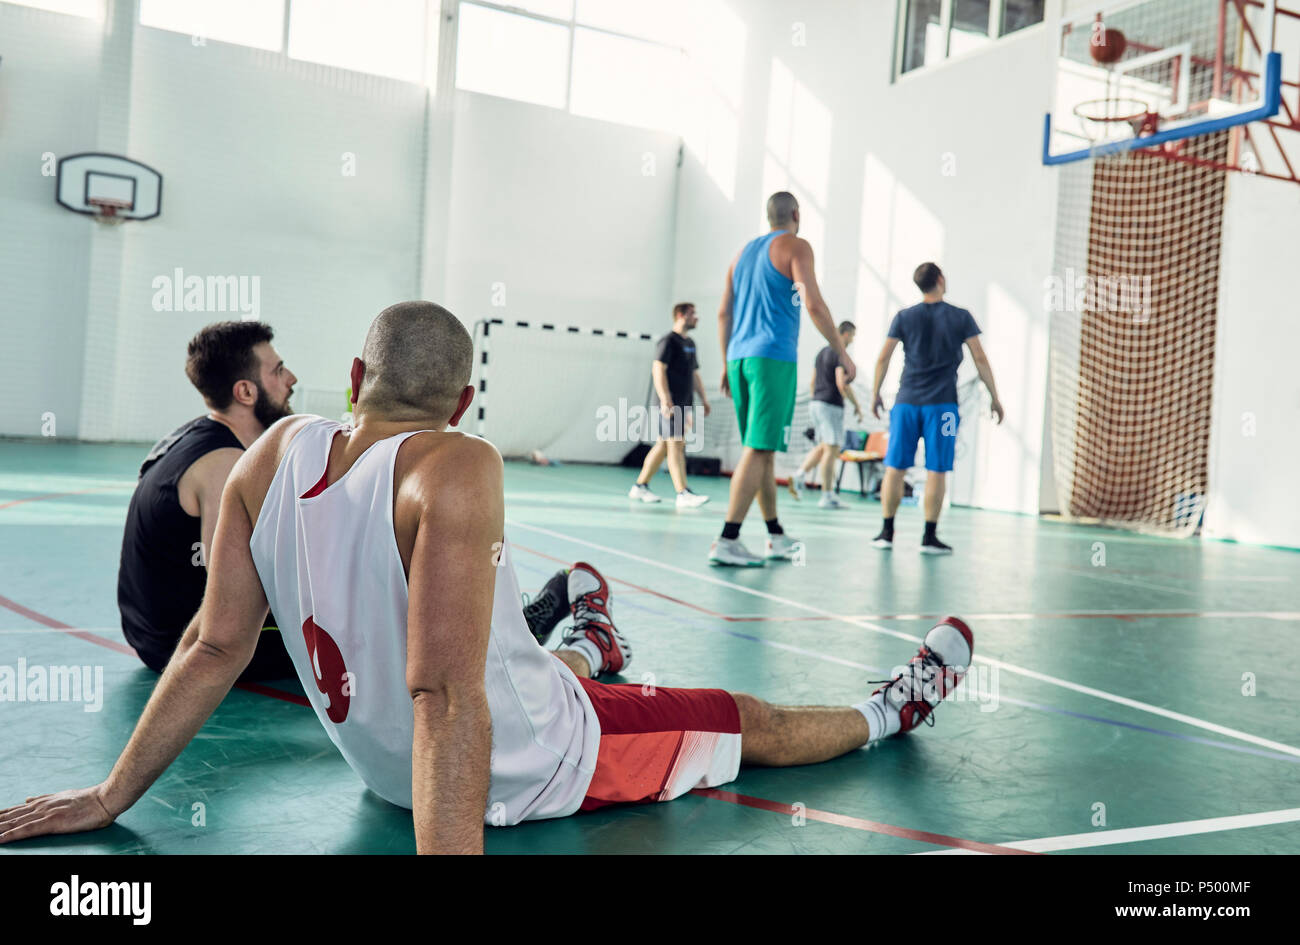 Basketball players during break, sitting on court Stock Photo